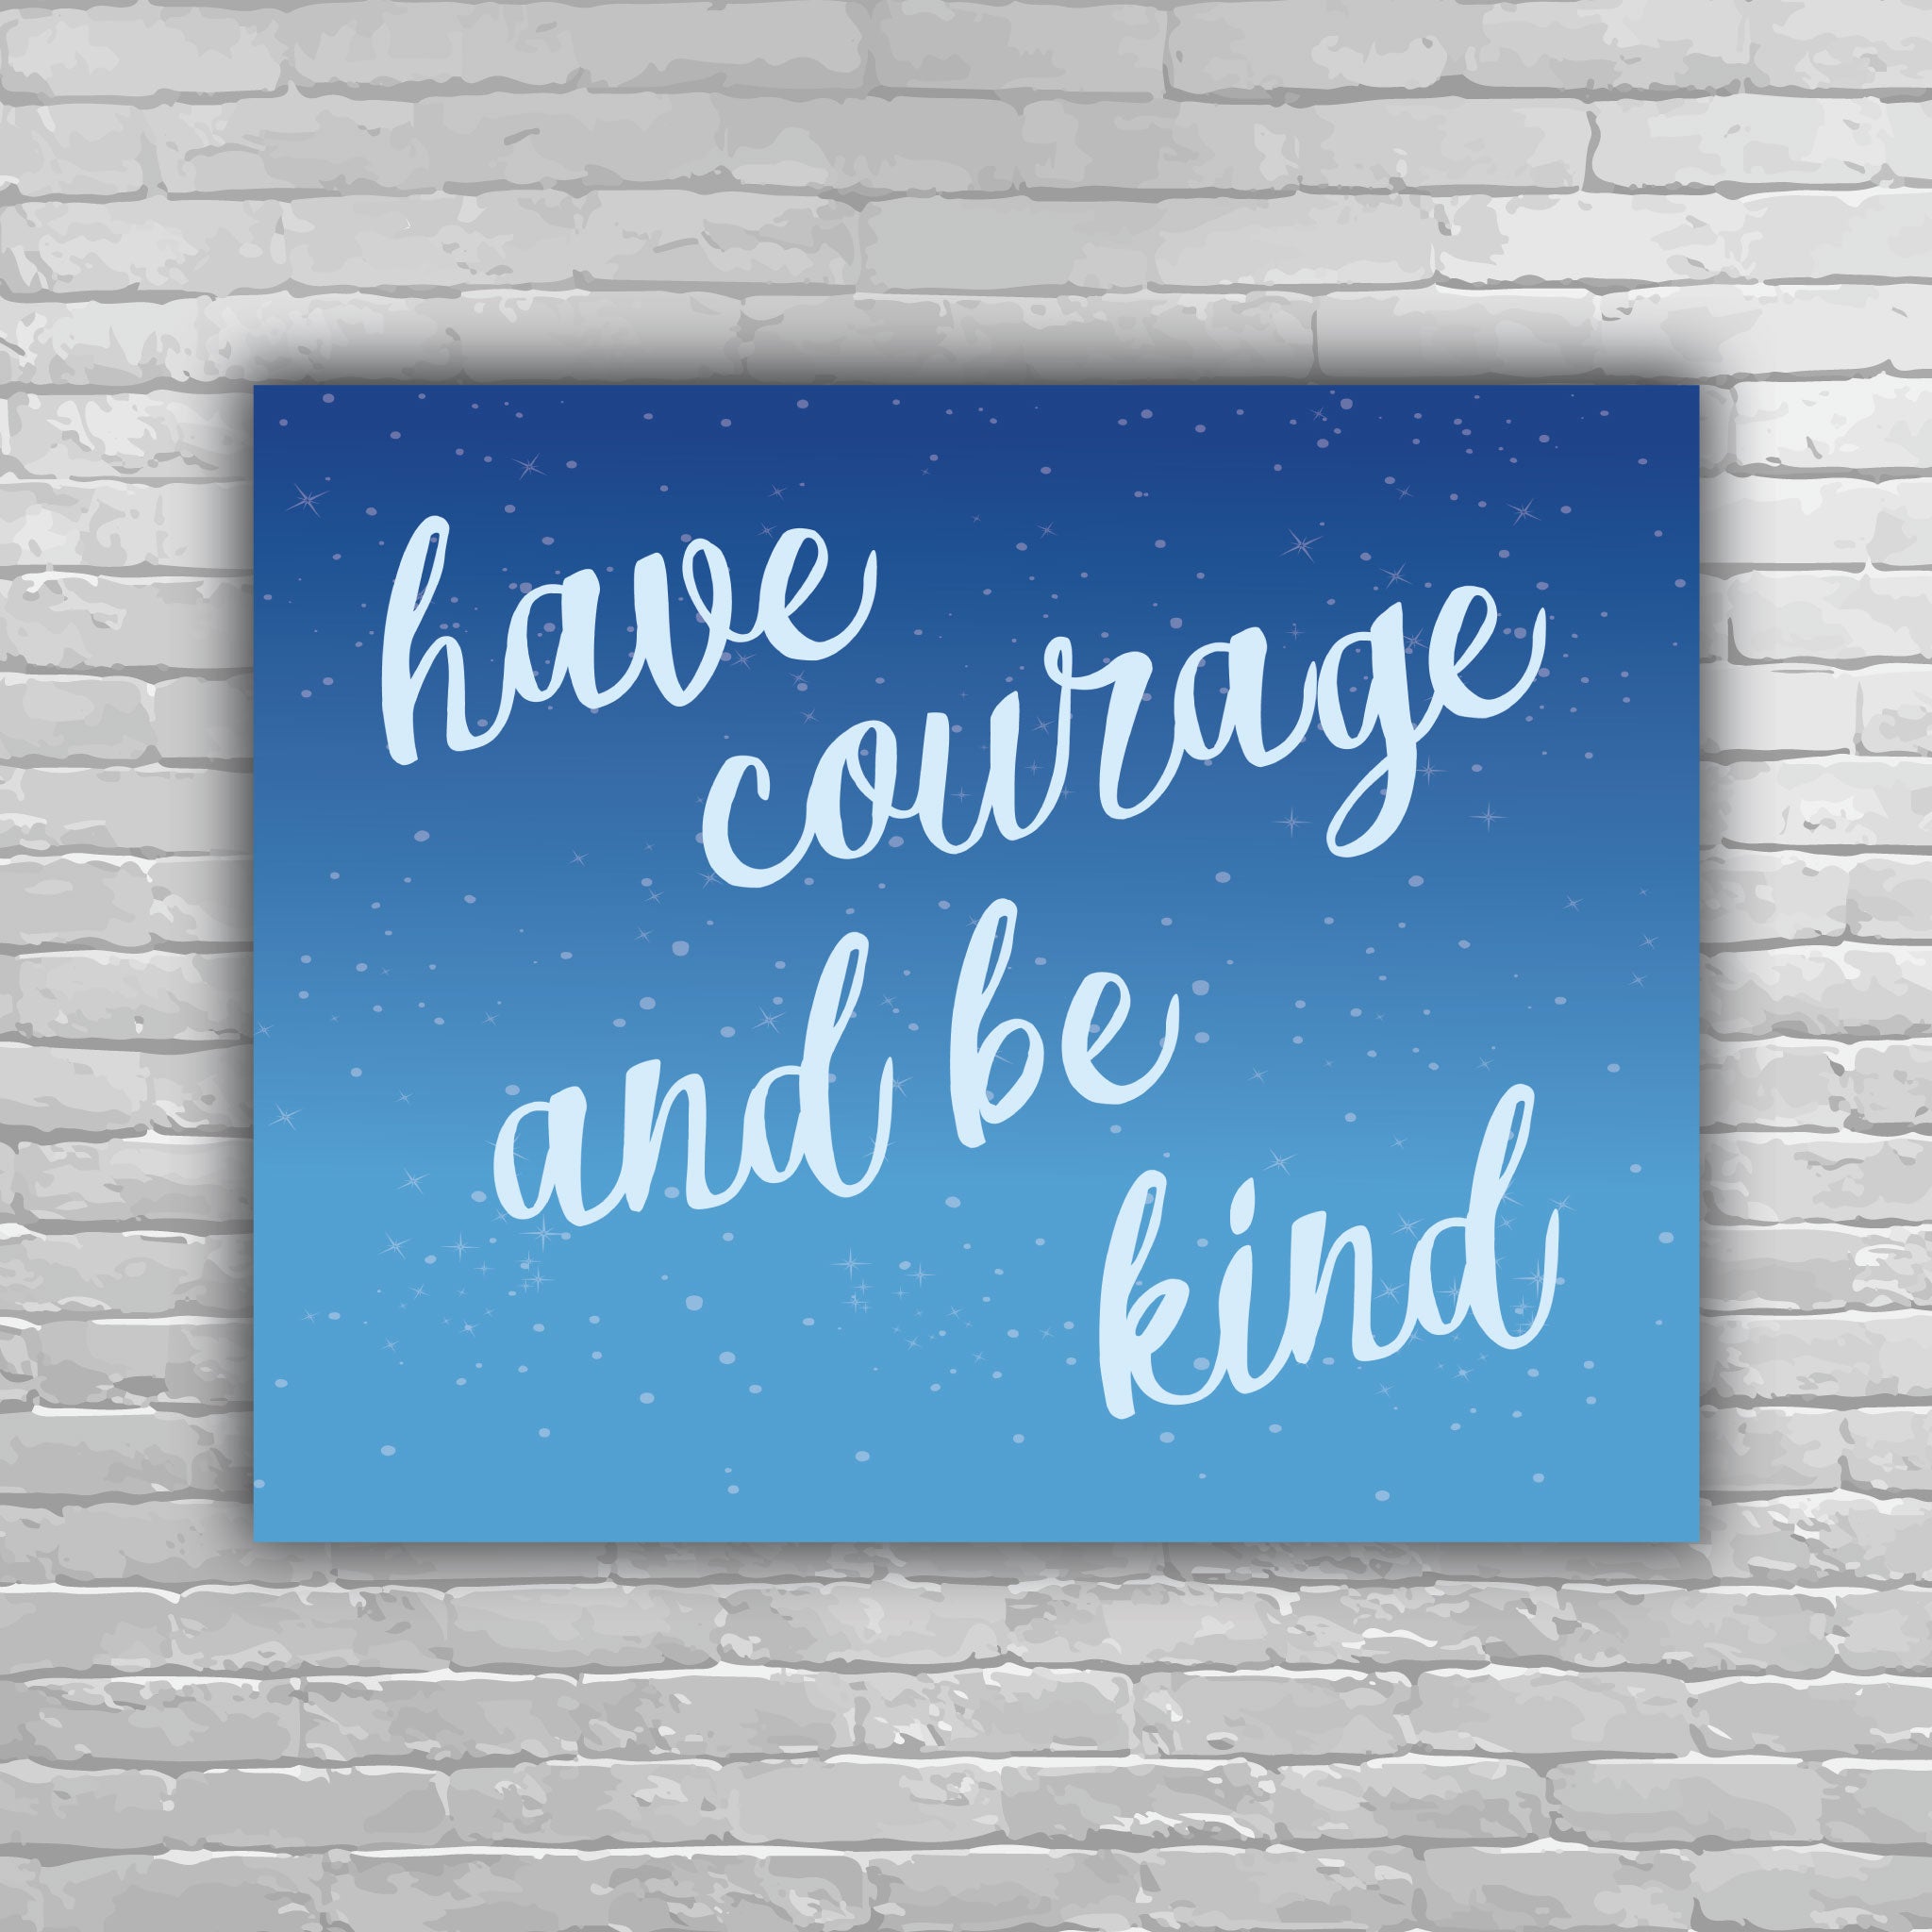 Have Courage and Be Kind, stars